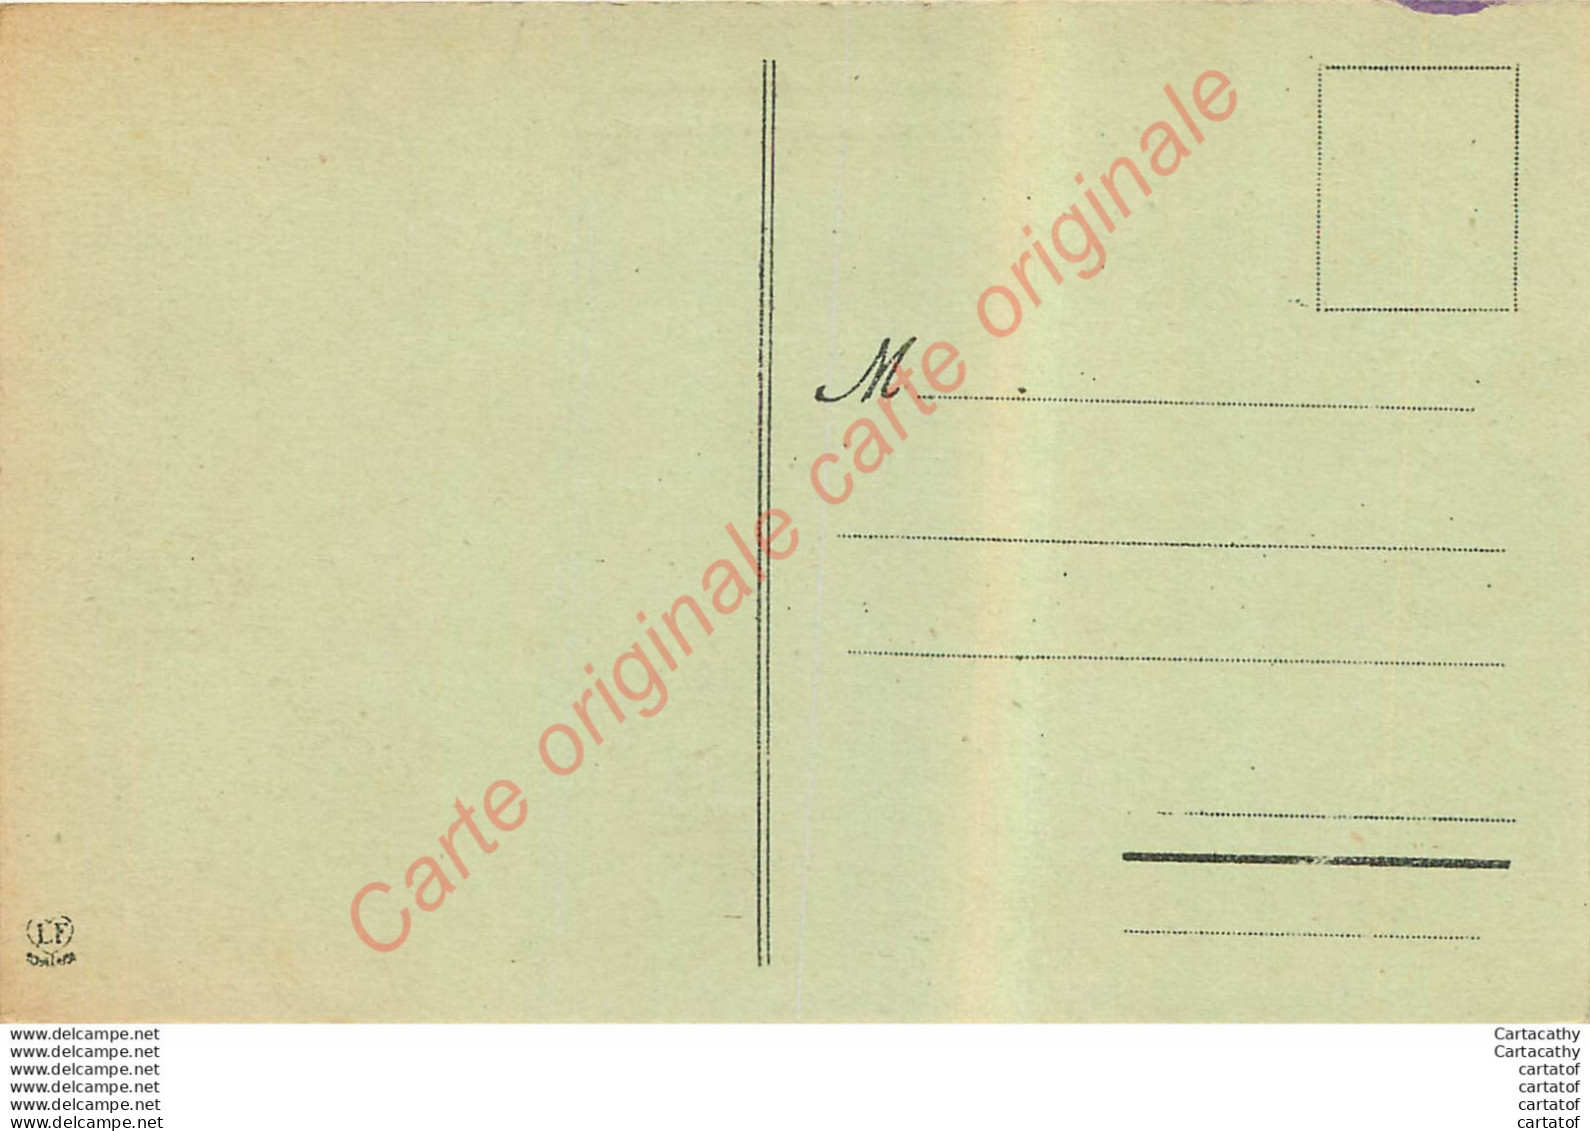 65.  TARBES .  VUE GENERALE .  CPA LABOUCHE FRERES TOULOUSE . - Tarbes